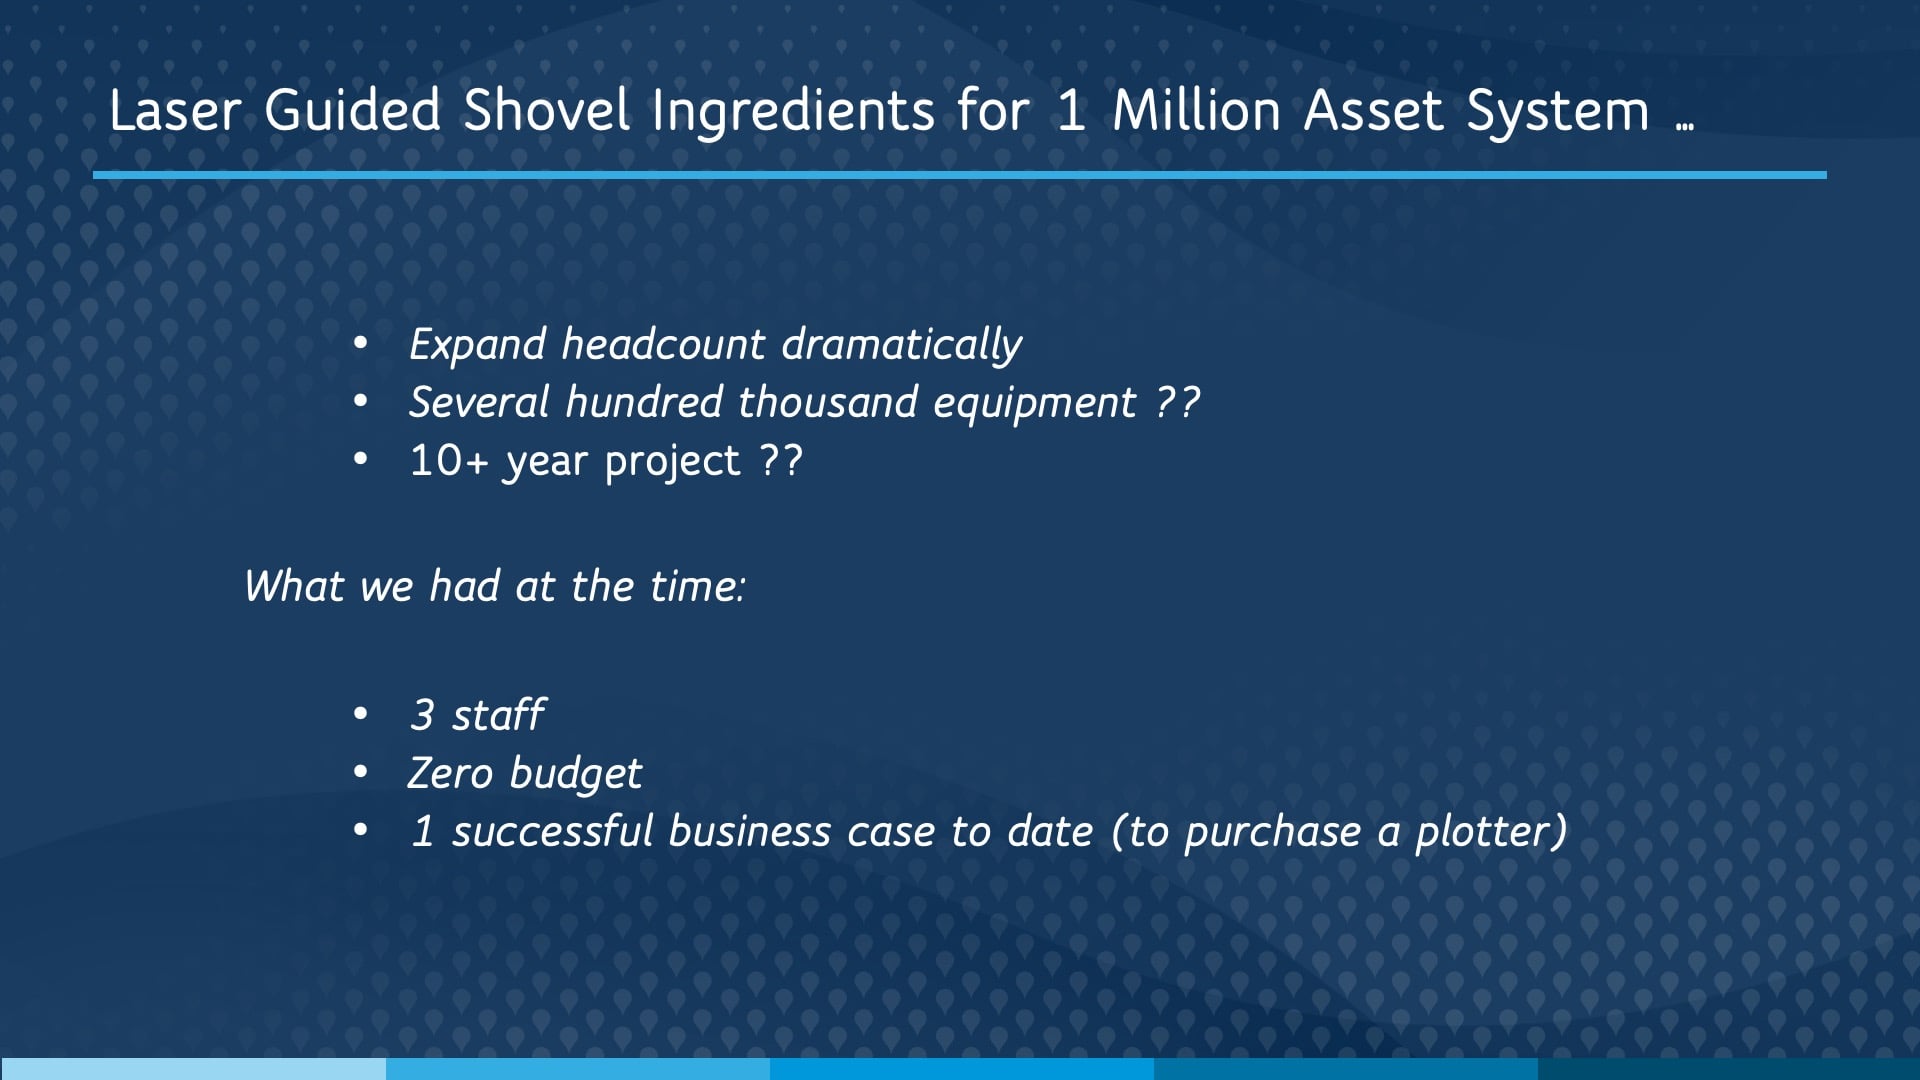 American Water Esri UC Presentation: Laser Guided Shovel Requirements for a 1 Million Asset System